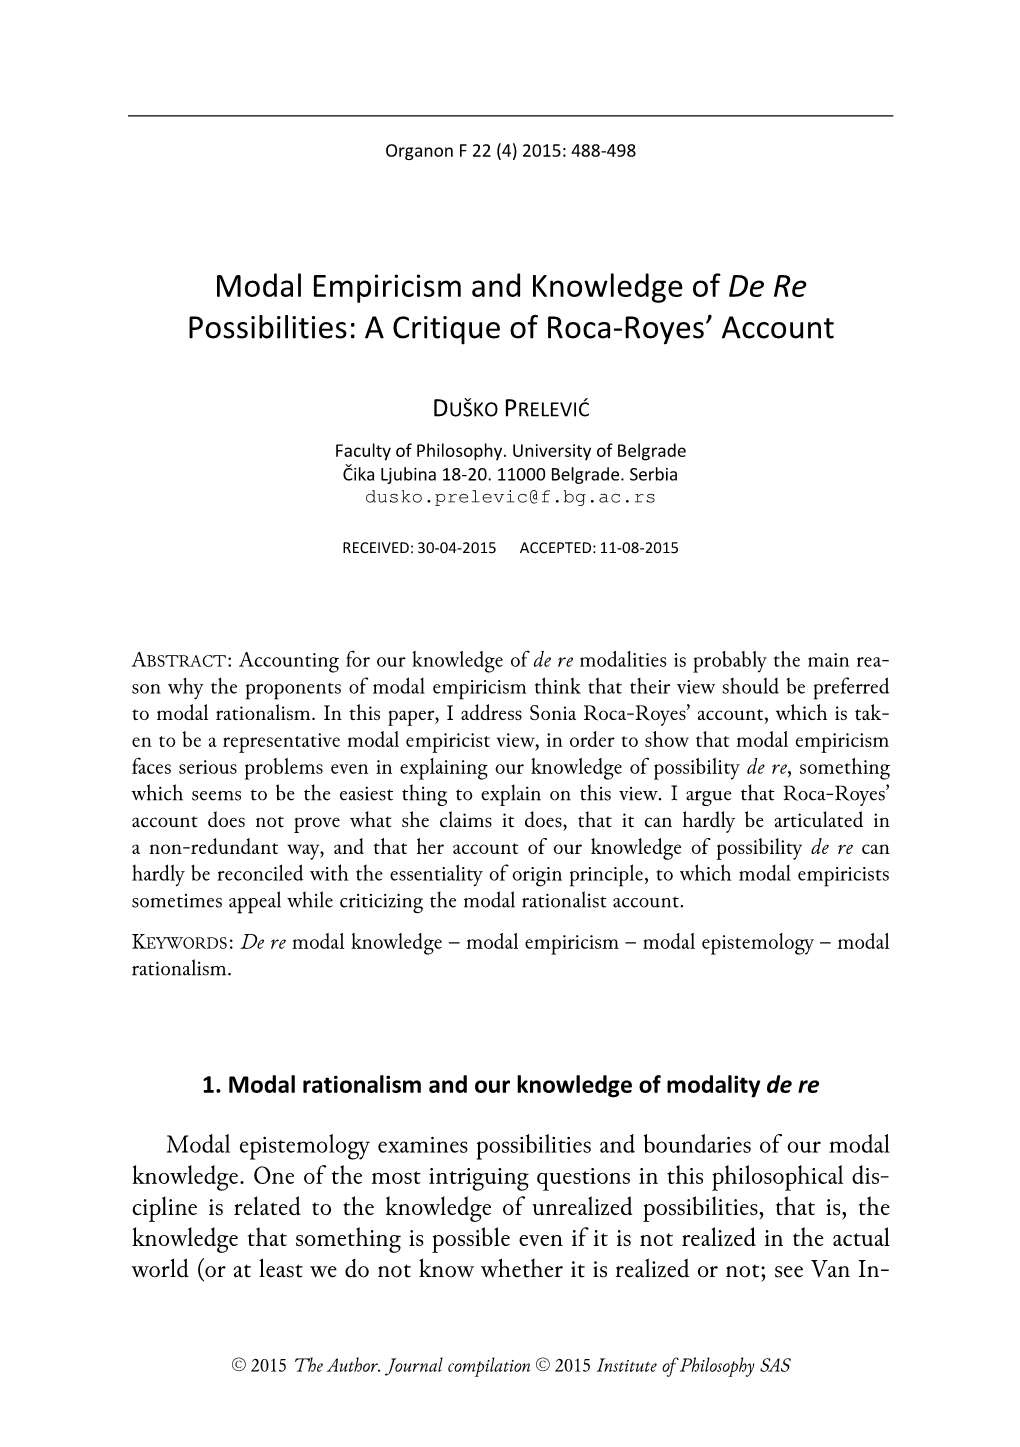 Modal Empiricism and Knowledge of De Re Possibilities: a Critique of Roca-Royes’ Account